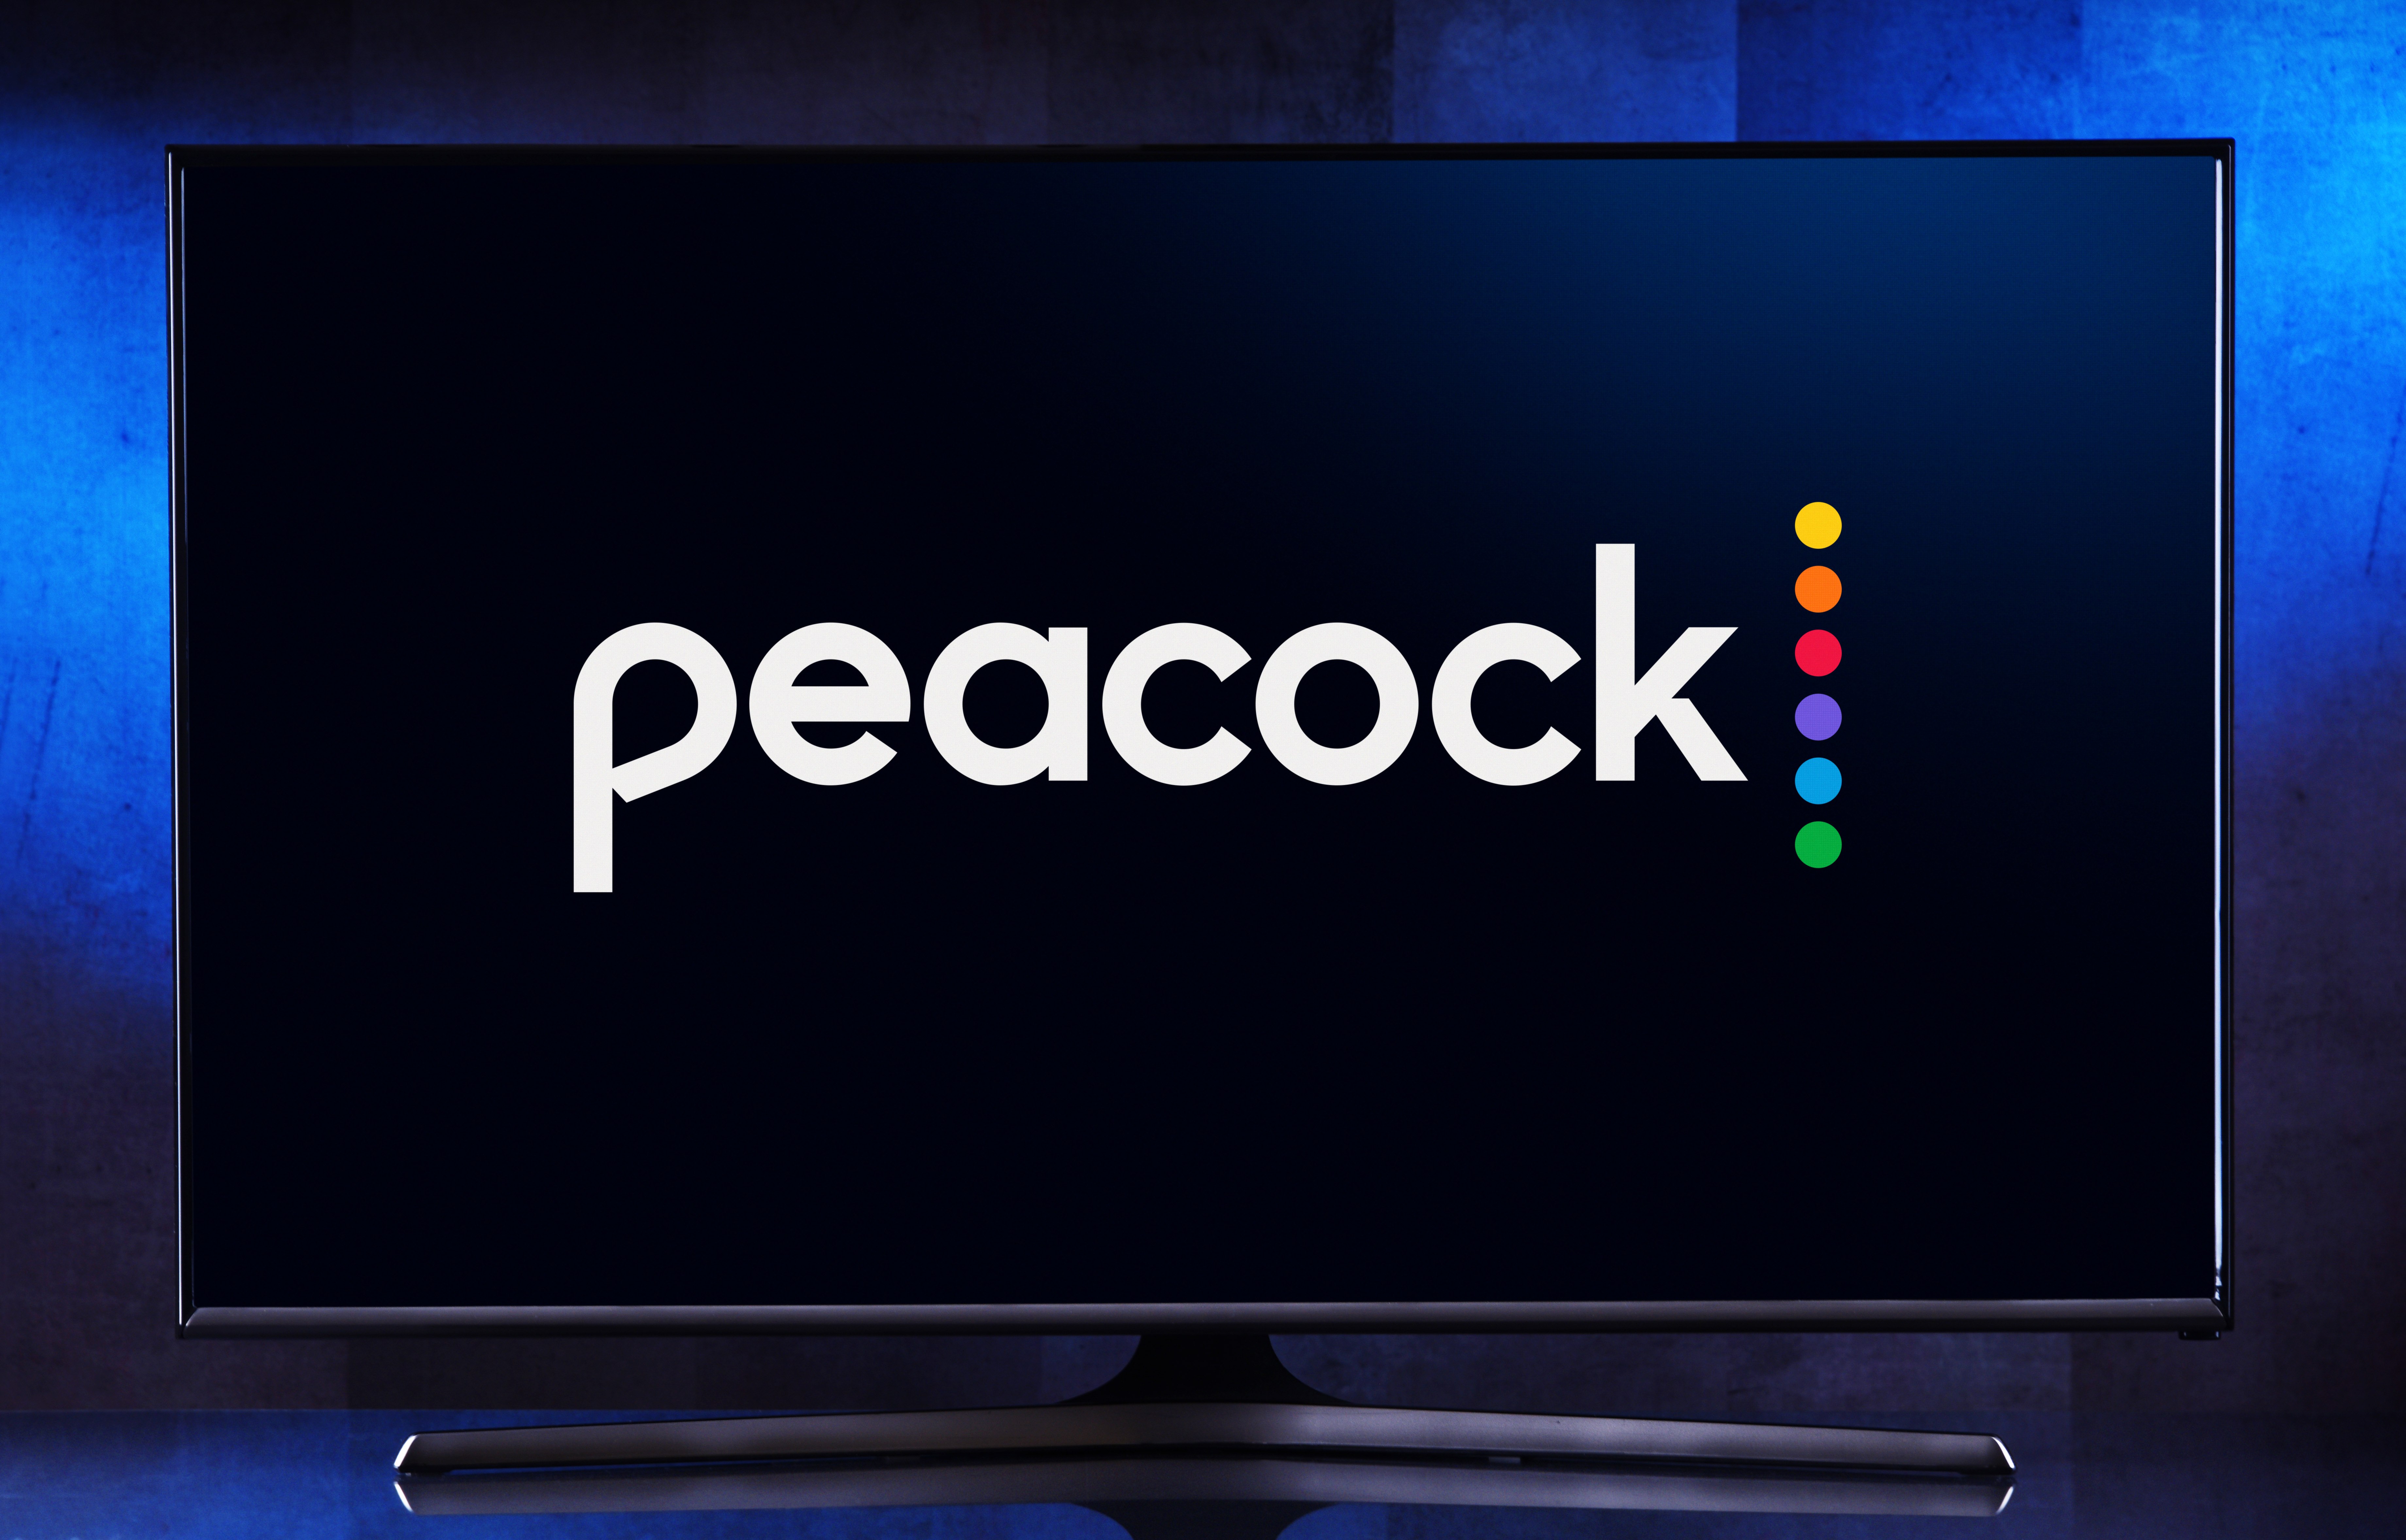 Paramount+ & Peacock Are Reportedly Merging & Sports Is Likely the Main Reason Behind the Merger